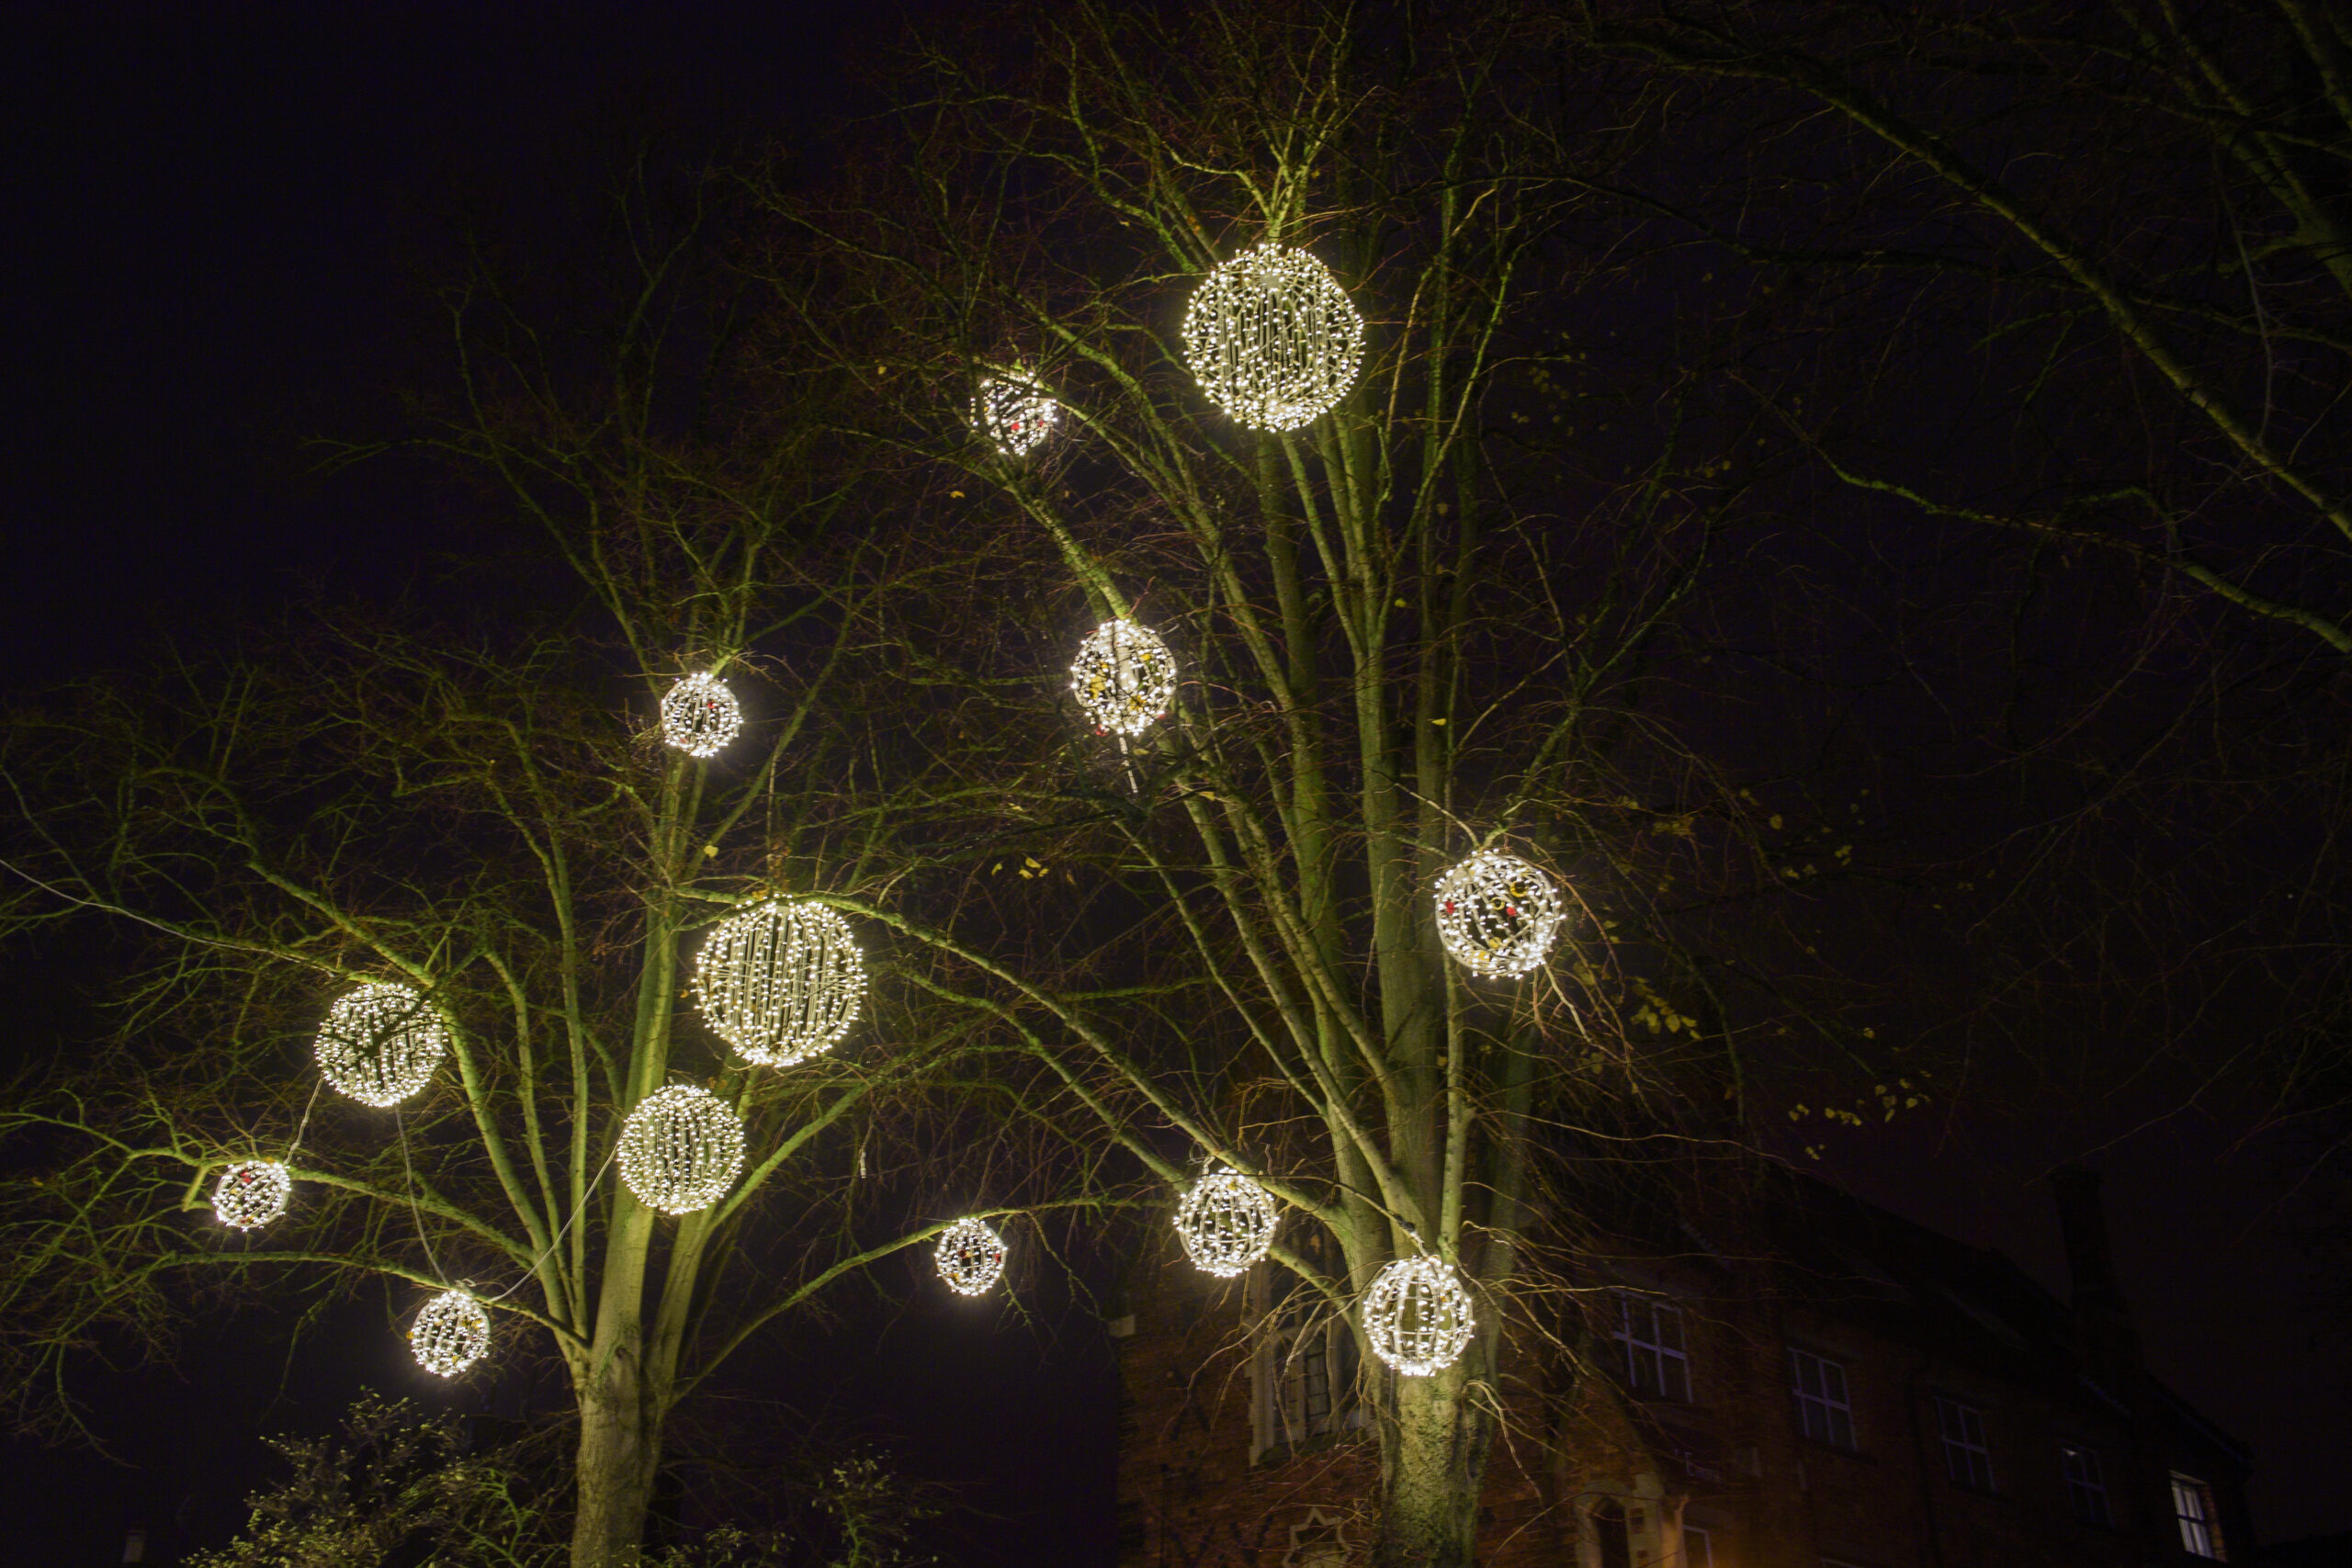 Light-up 3D bauble motifs by Fizzco Projects displayed on trees in Lincoln City Centre for the Christmas period.